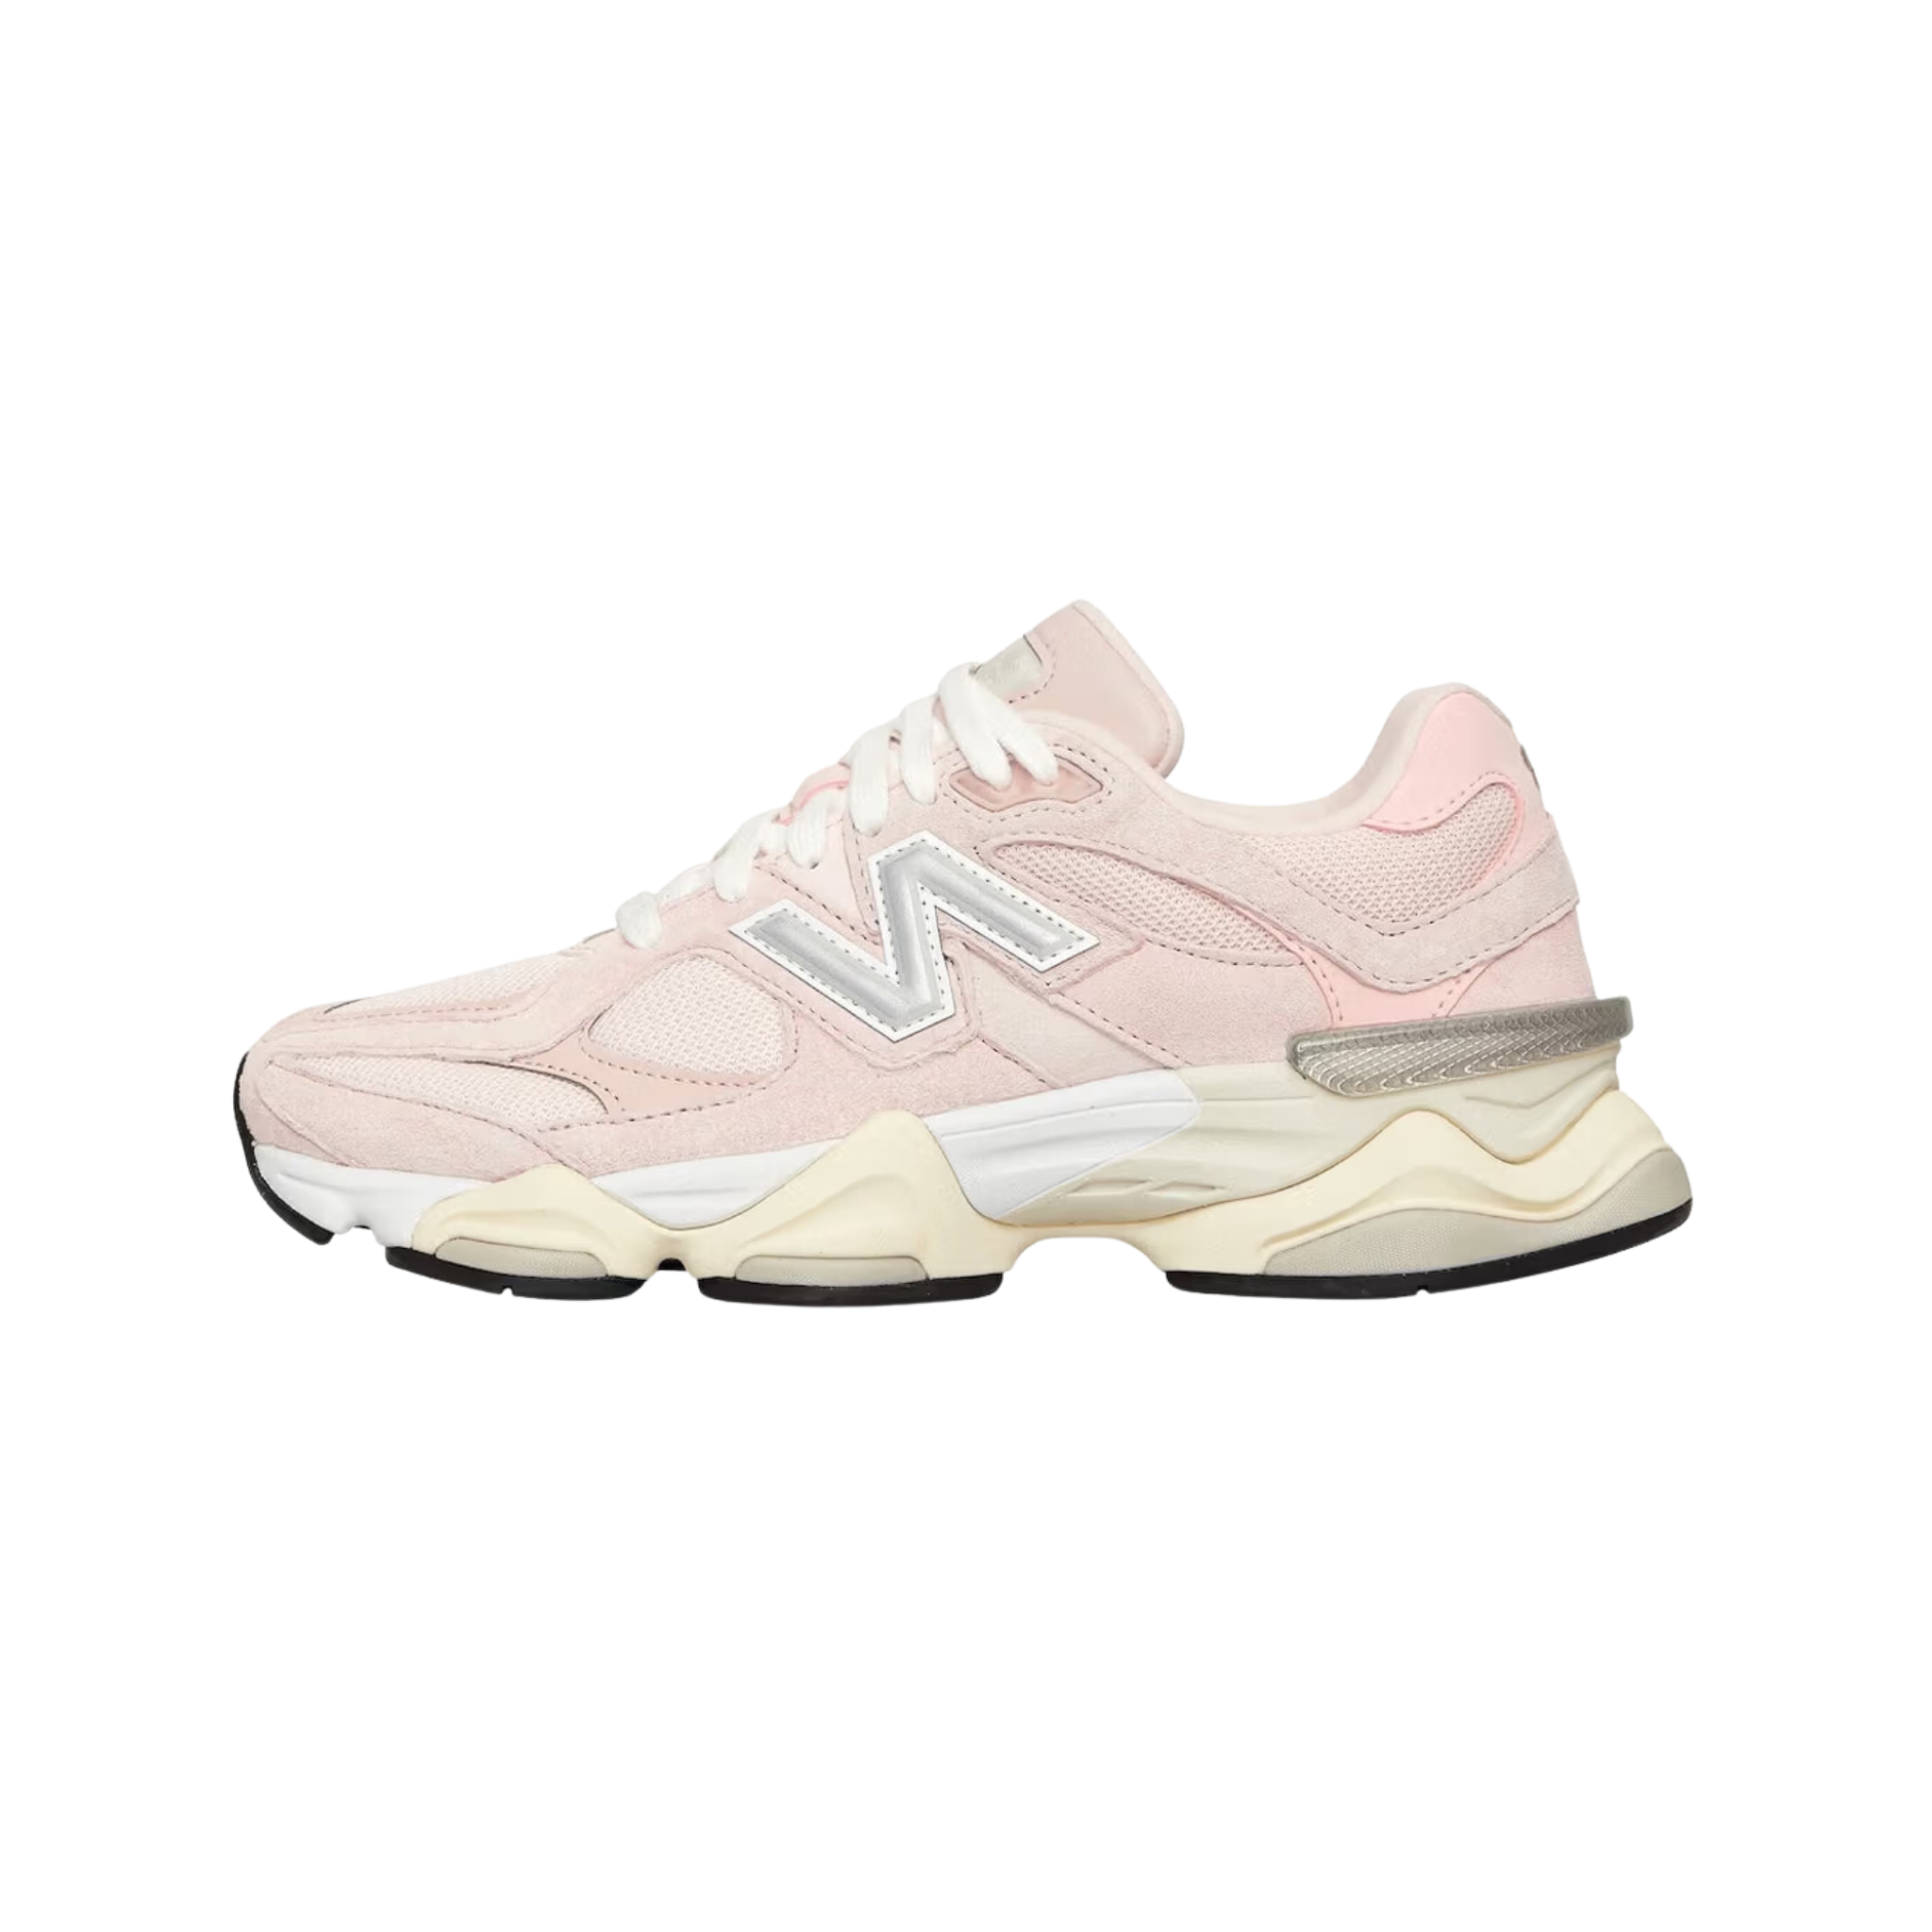 New Balance 9060 Crystal Pink - Hype Temple